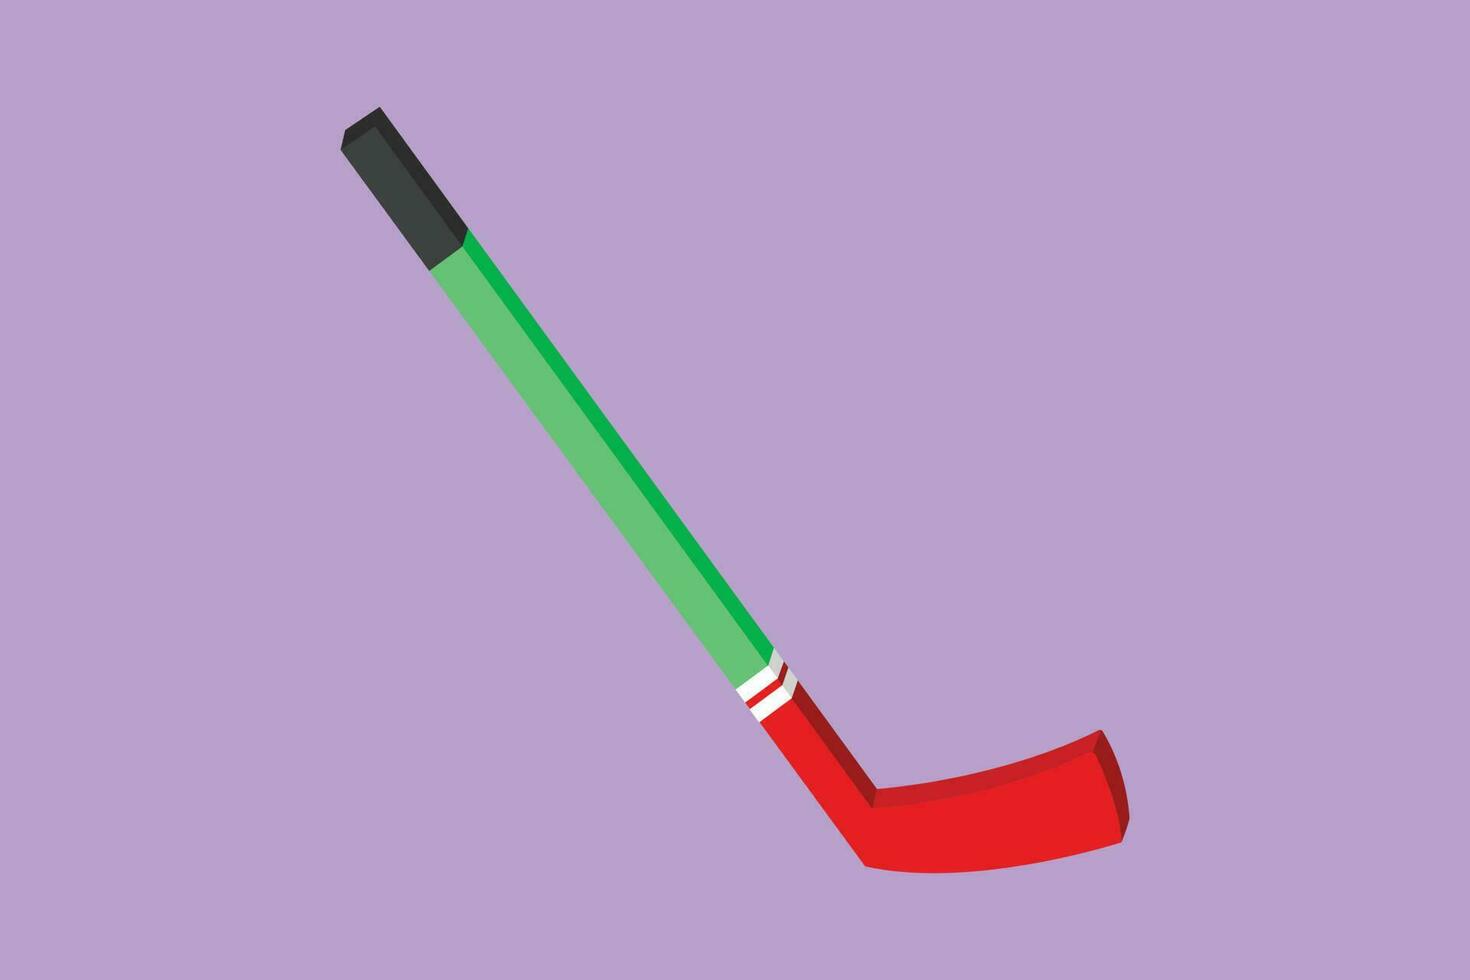 Character flat drawing ice hockey stick logo or symbol. Hockey puck stick, indoor ice sport, game equipment, goal or competition, leisure activity in winter season. Cartoon design vector illustration